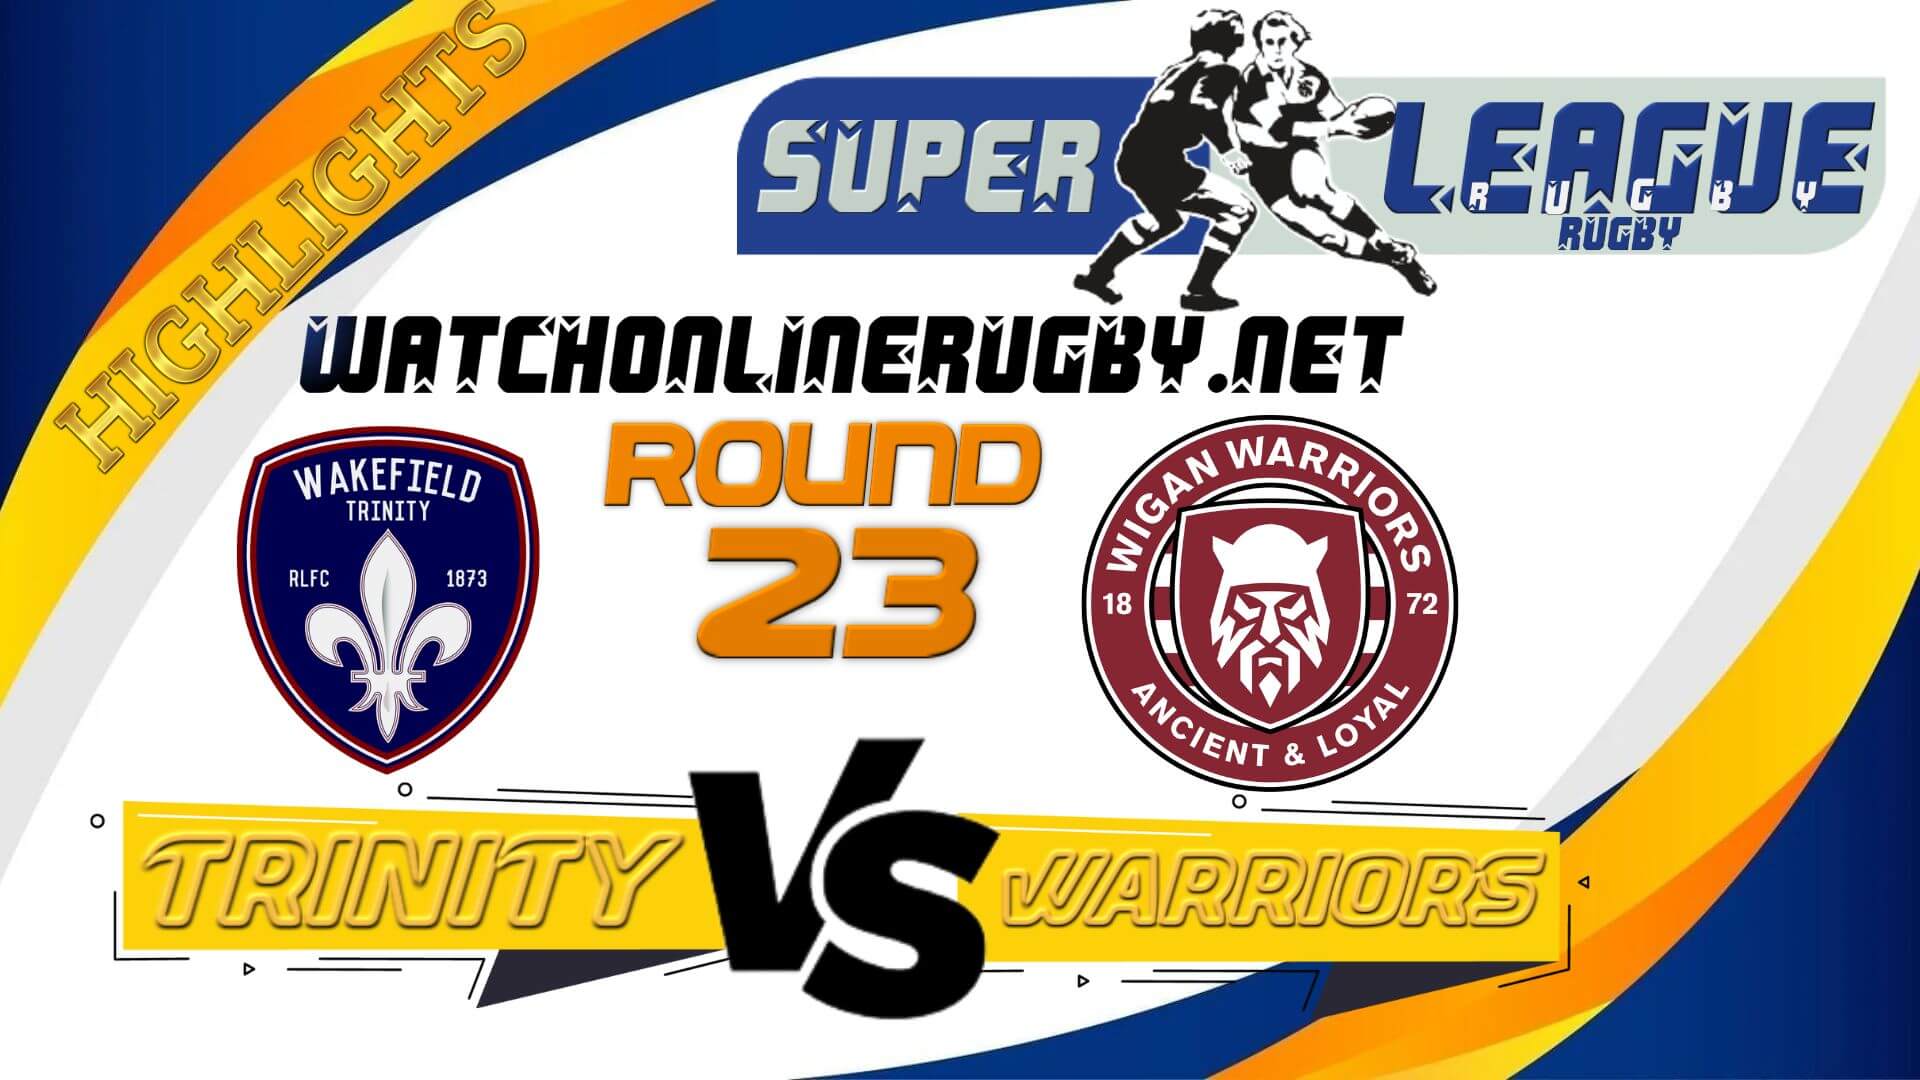 Wakefield Trinity Vs Wigan Warriors Super League Rugby 2022 RD 23